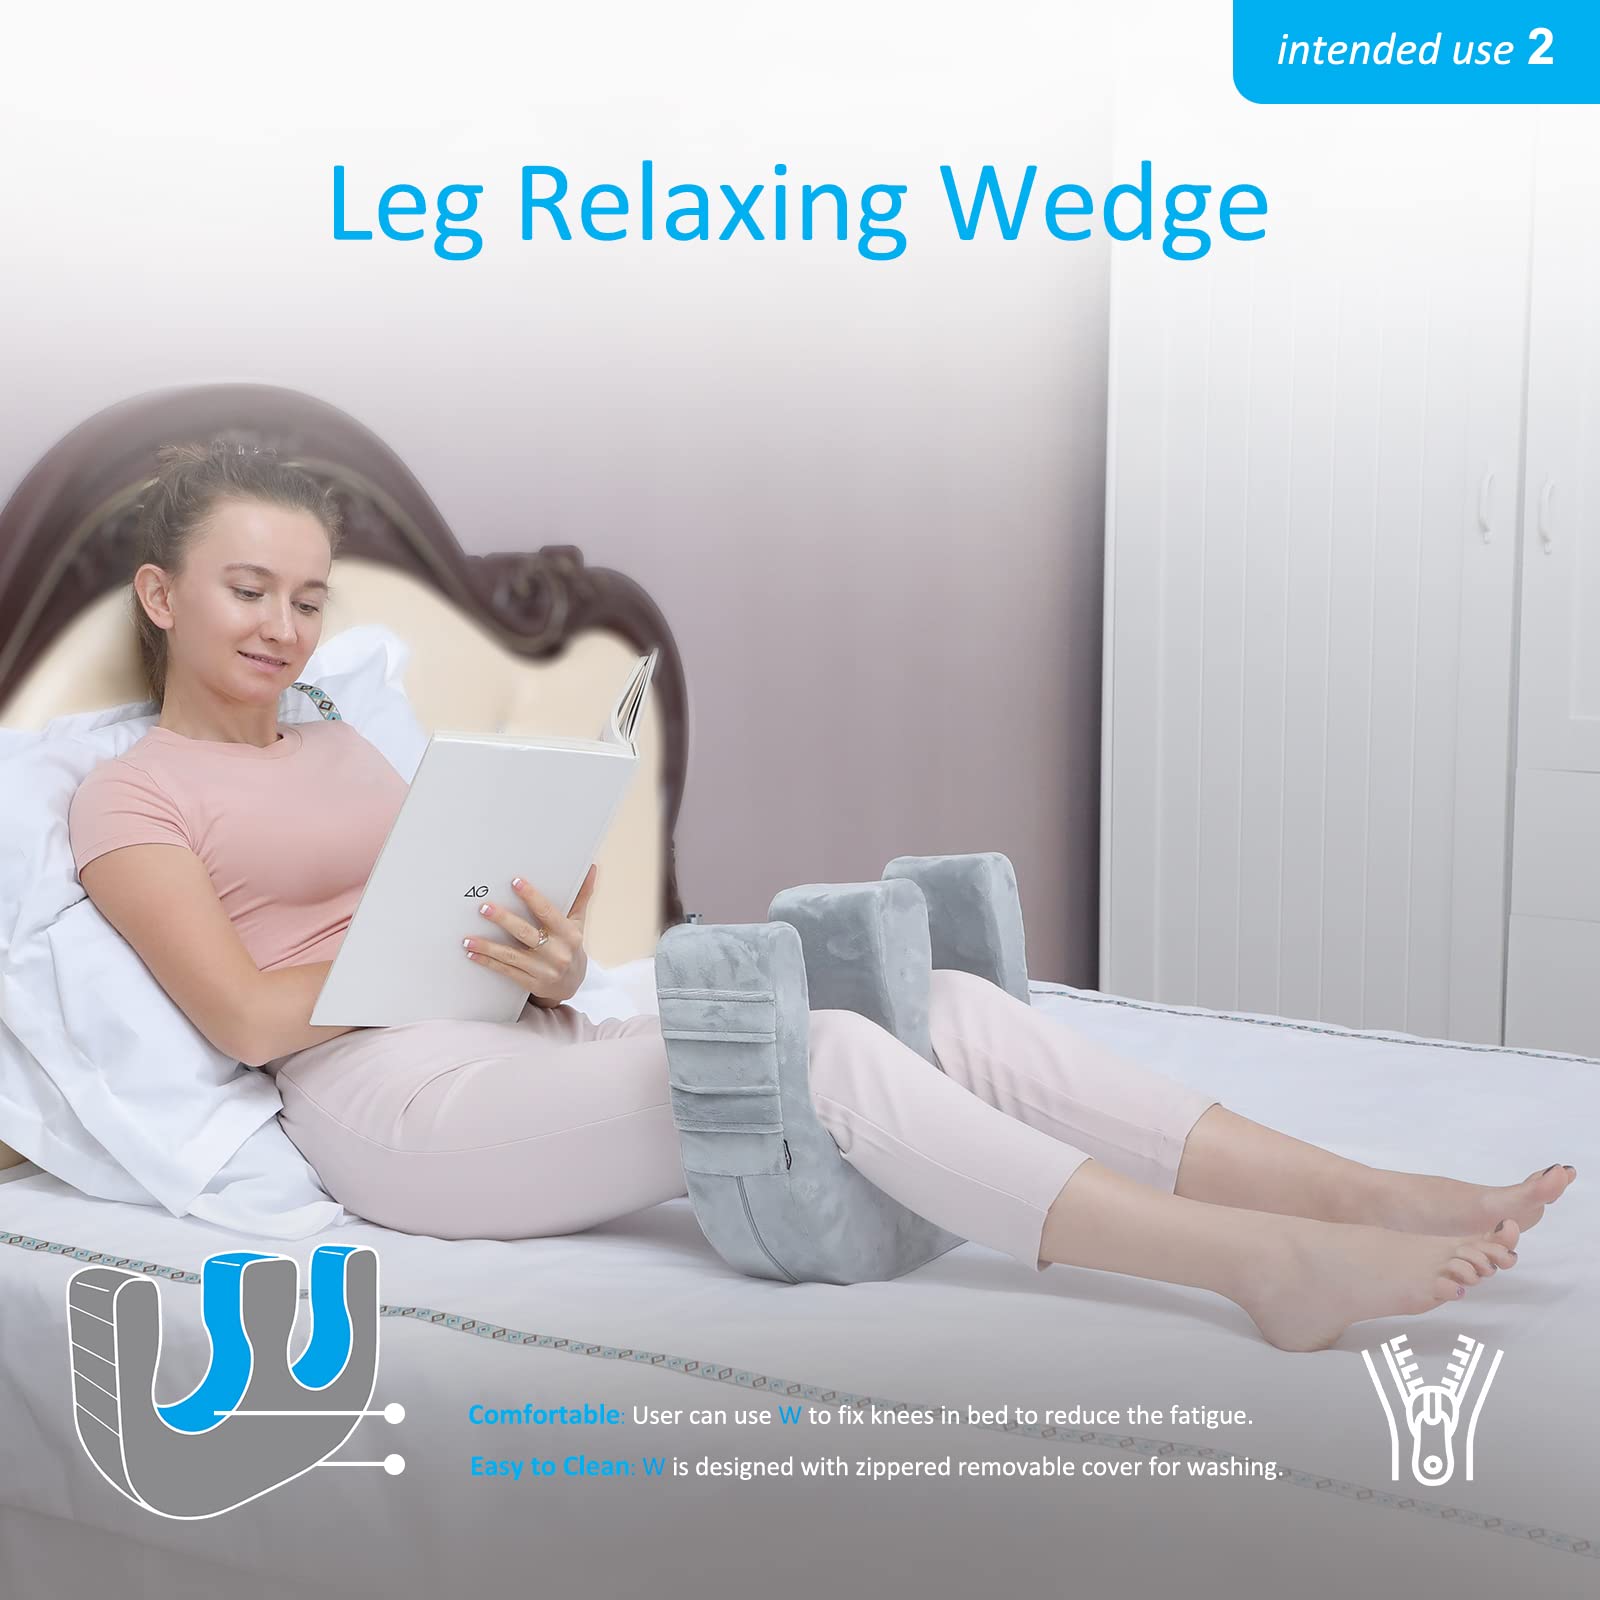 rehand Patient Turning Device, Multifunctional U-Shaped Turning Device, Anti-Decubitus Paralyzed Patient Turning Pillow, Bed Rest Nursing Tool, Help Patients Or Bedridden Elderly People Turn Over